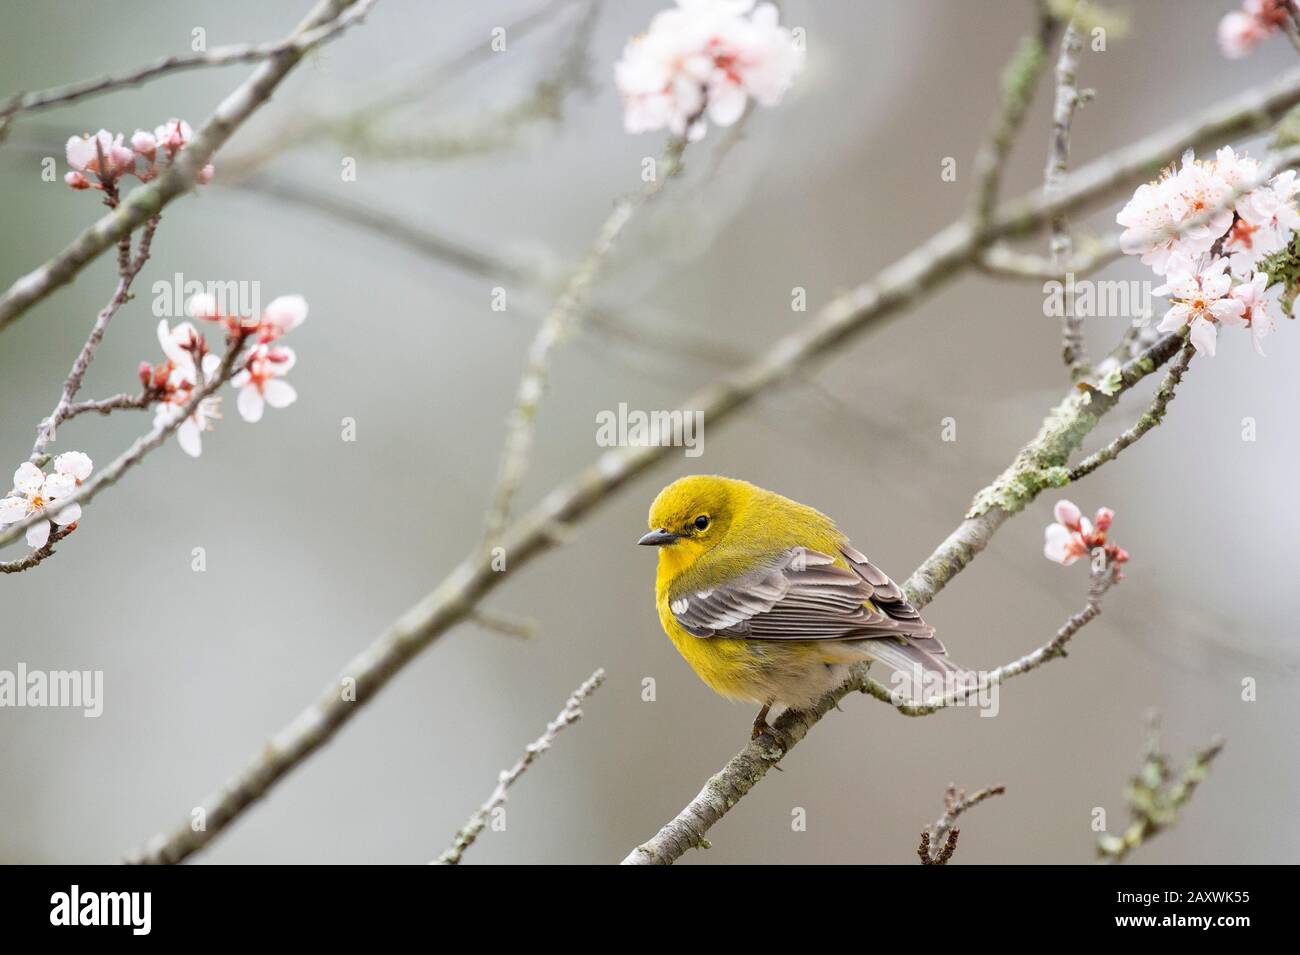 Bright yellow Pine Warbler perched in a flowering tree in spring in sotf overcast light. Stock Photo